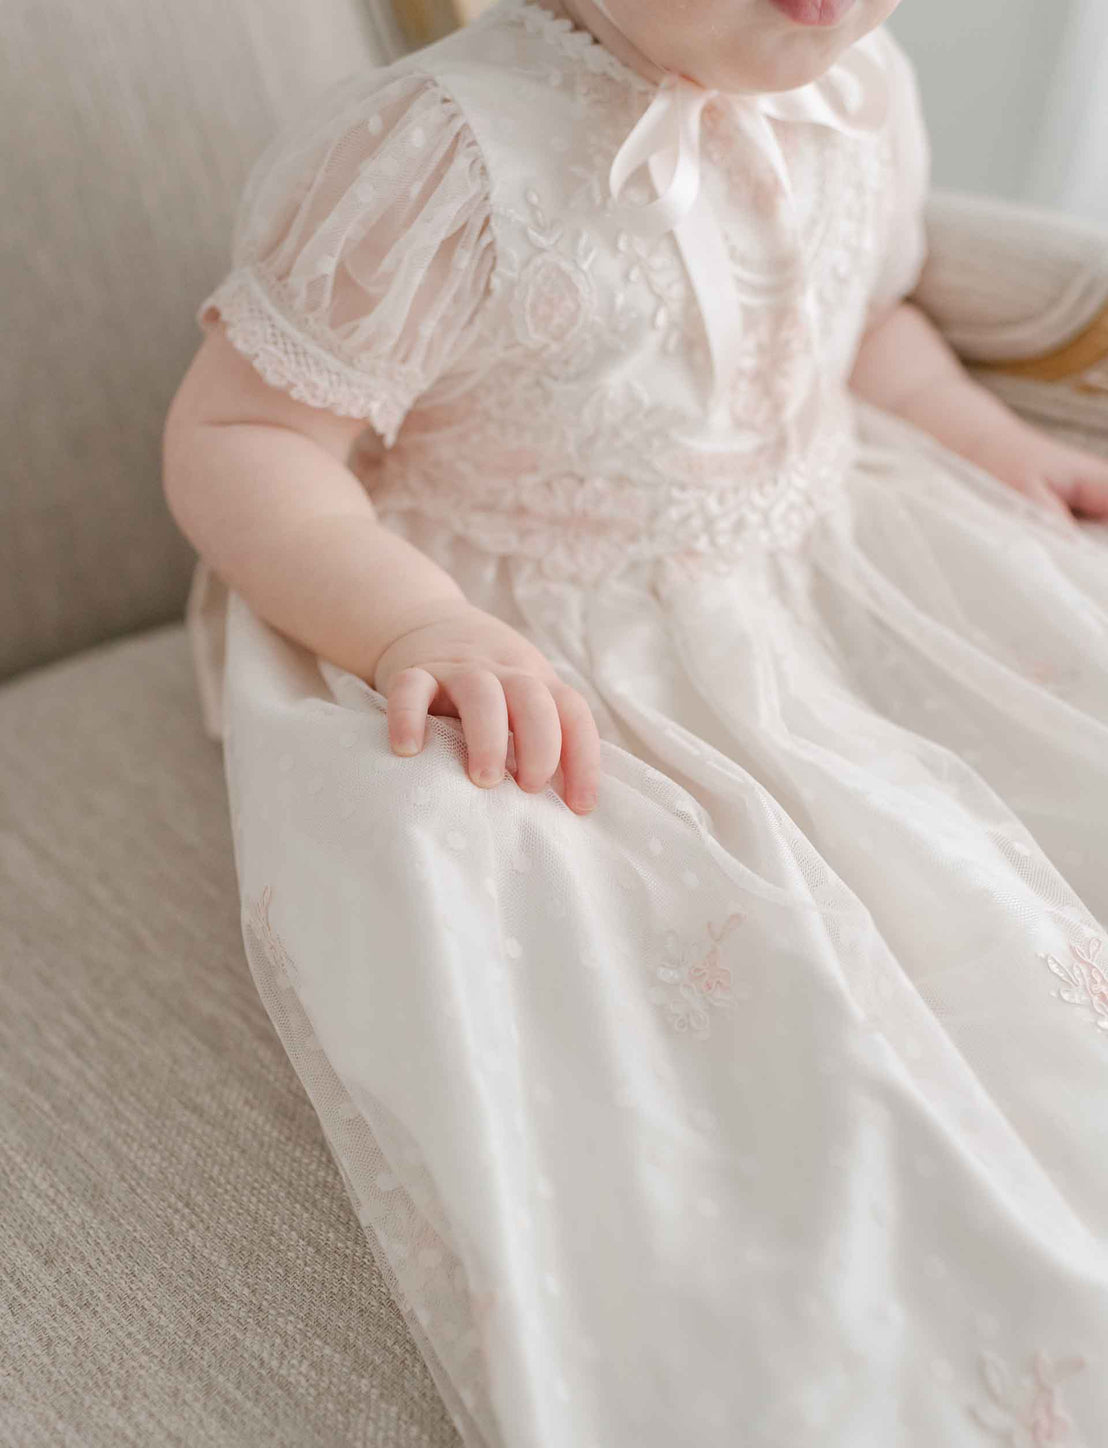 A close-up of a baby wearing the Elizabeth Christening Gown, focusing on the detailed fabric and the child's small hand resting on the gown.